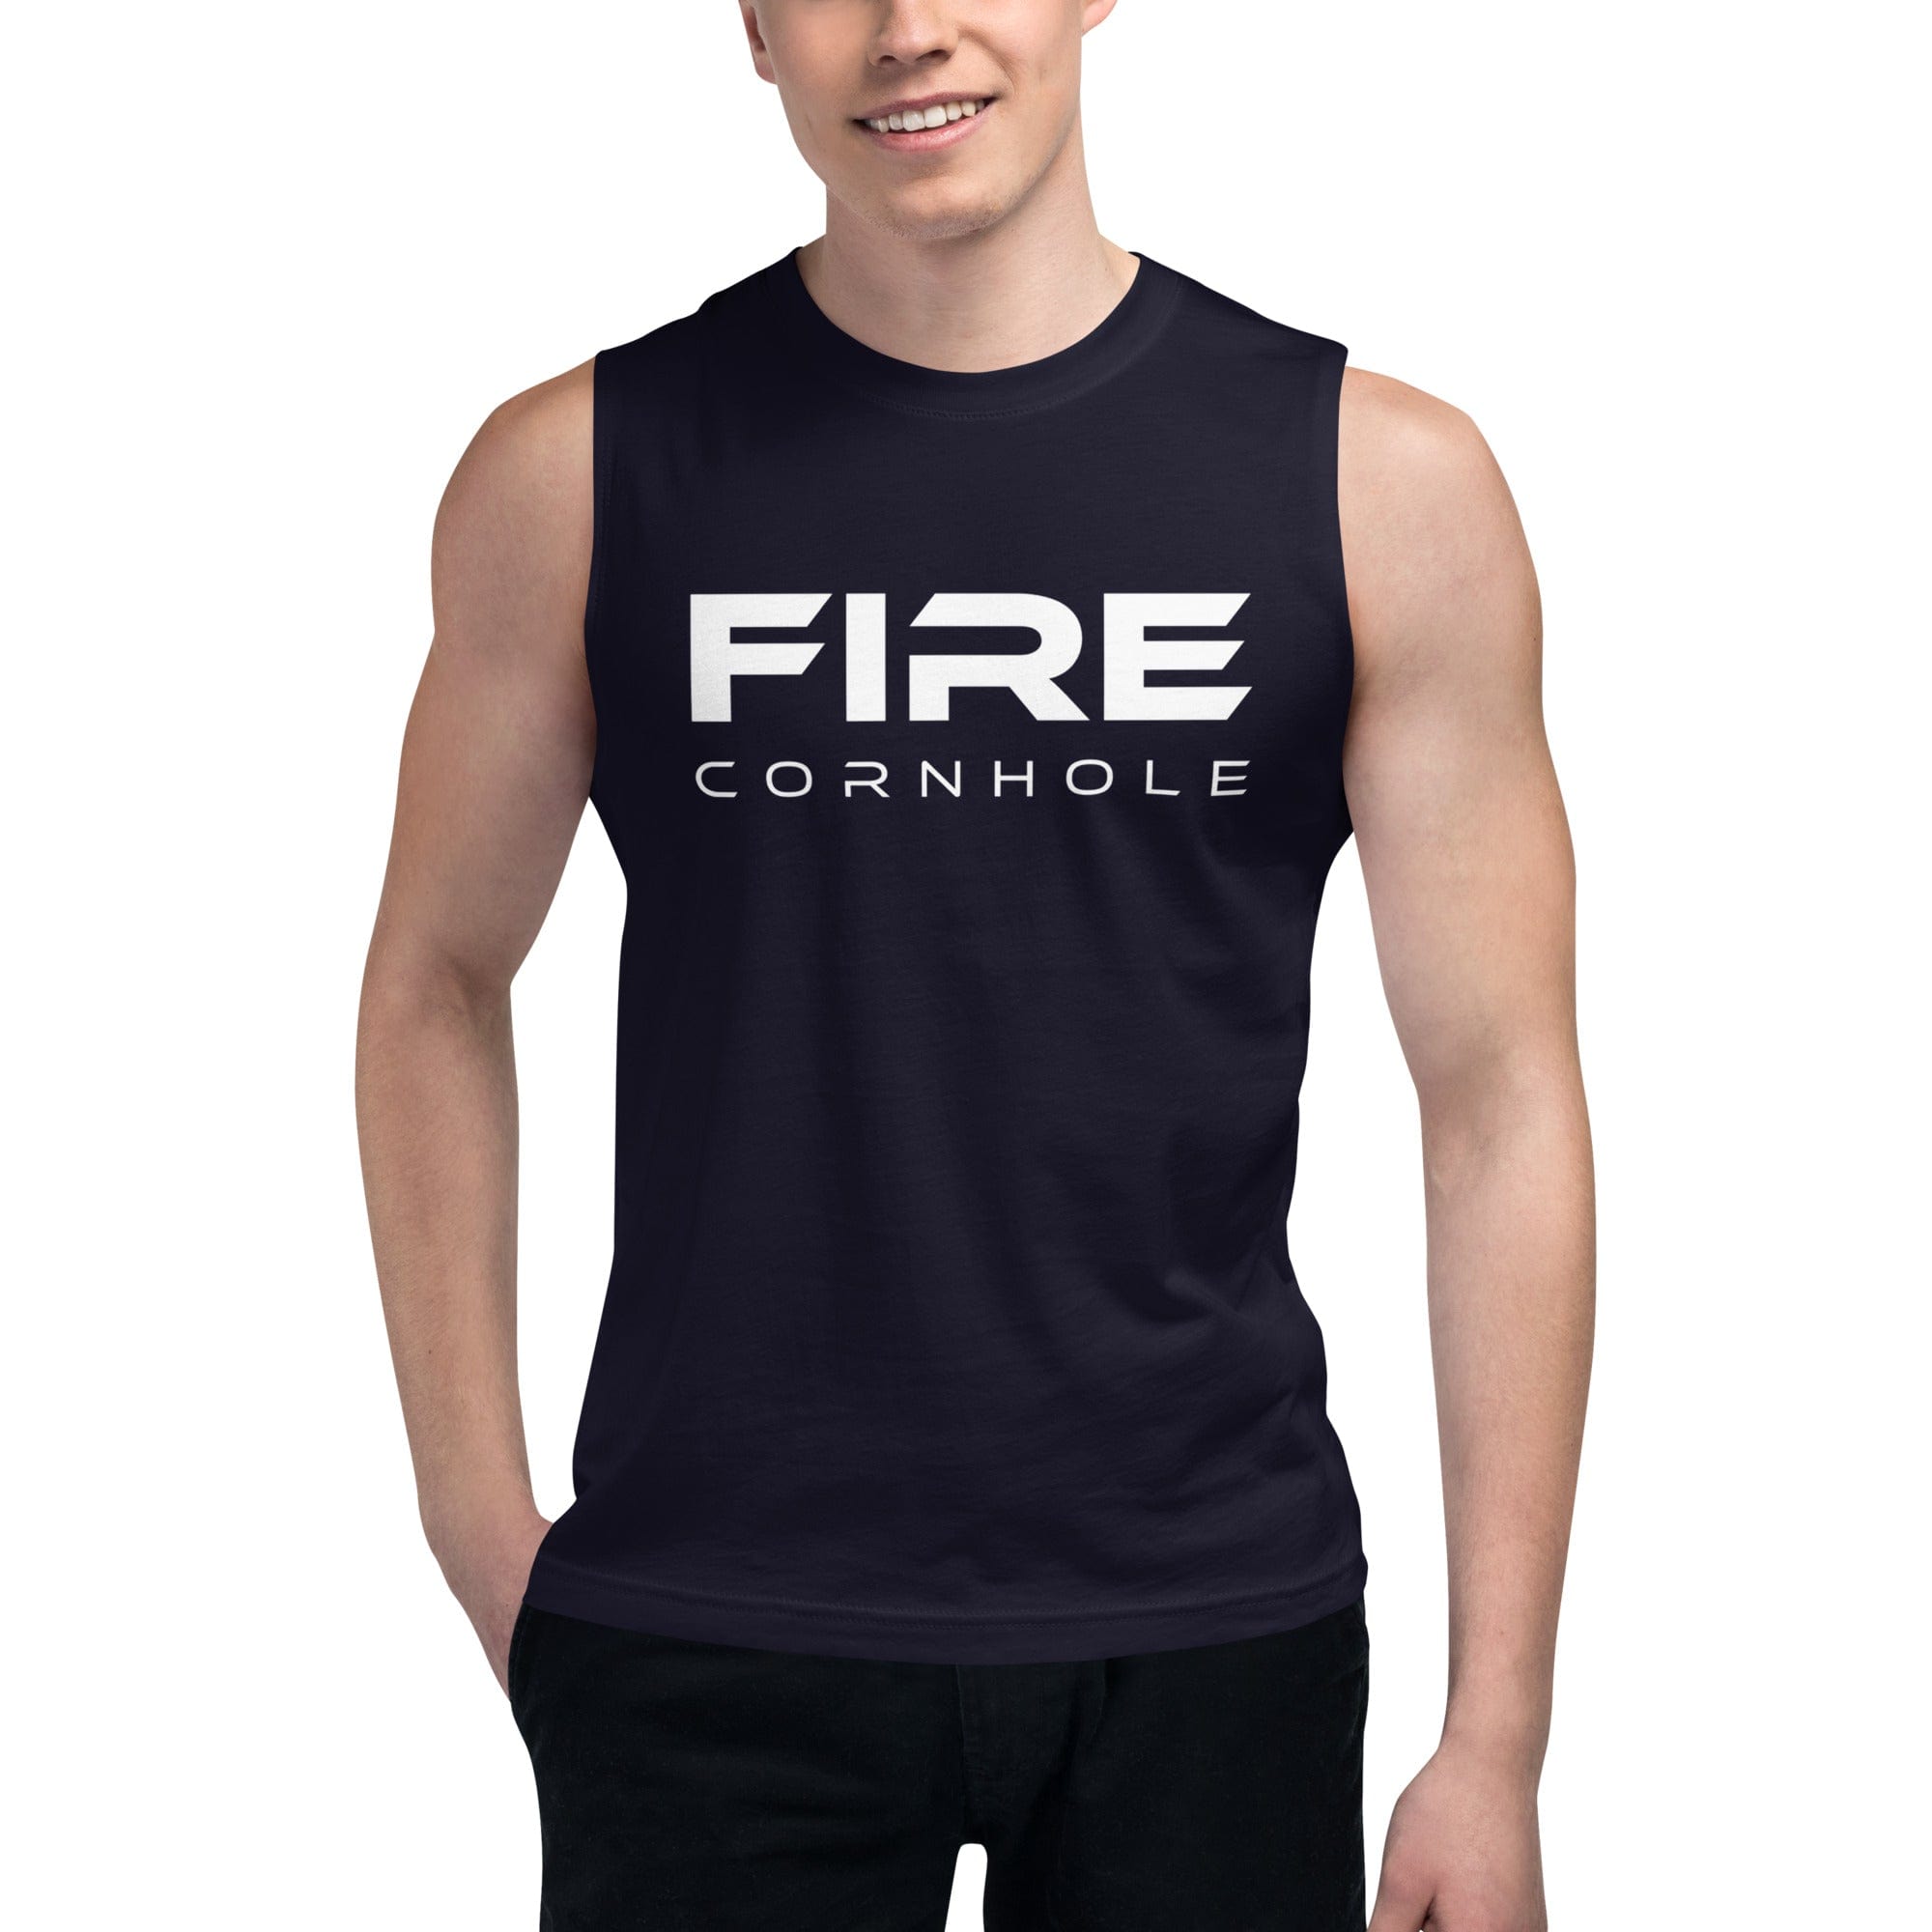 Men's navy muscle shirt with Fire Cornhole logo in white